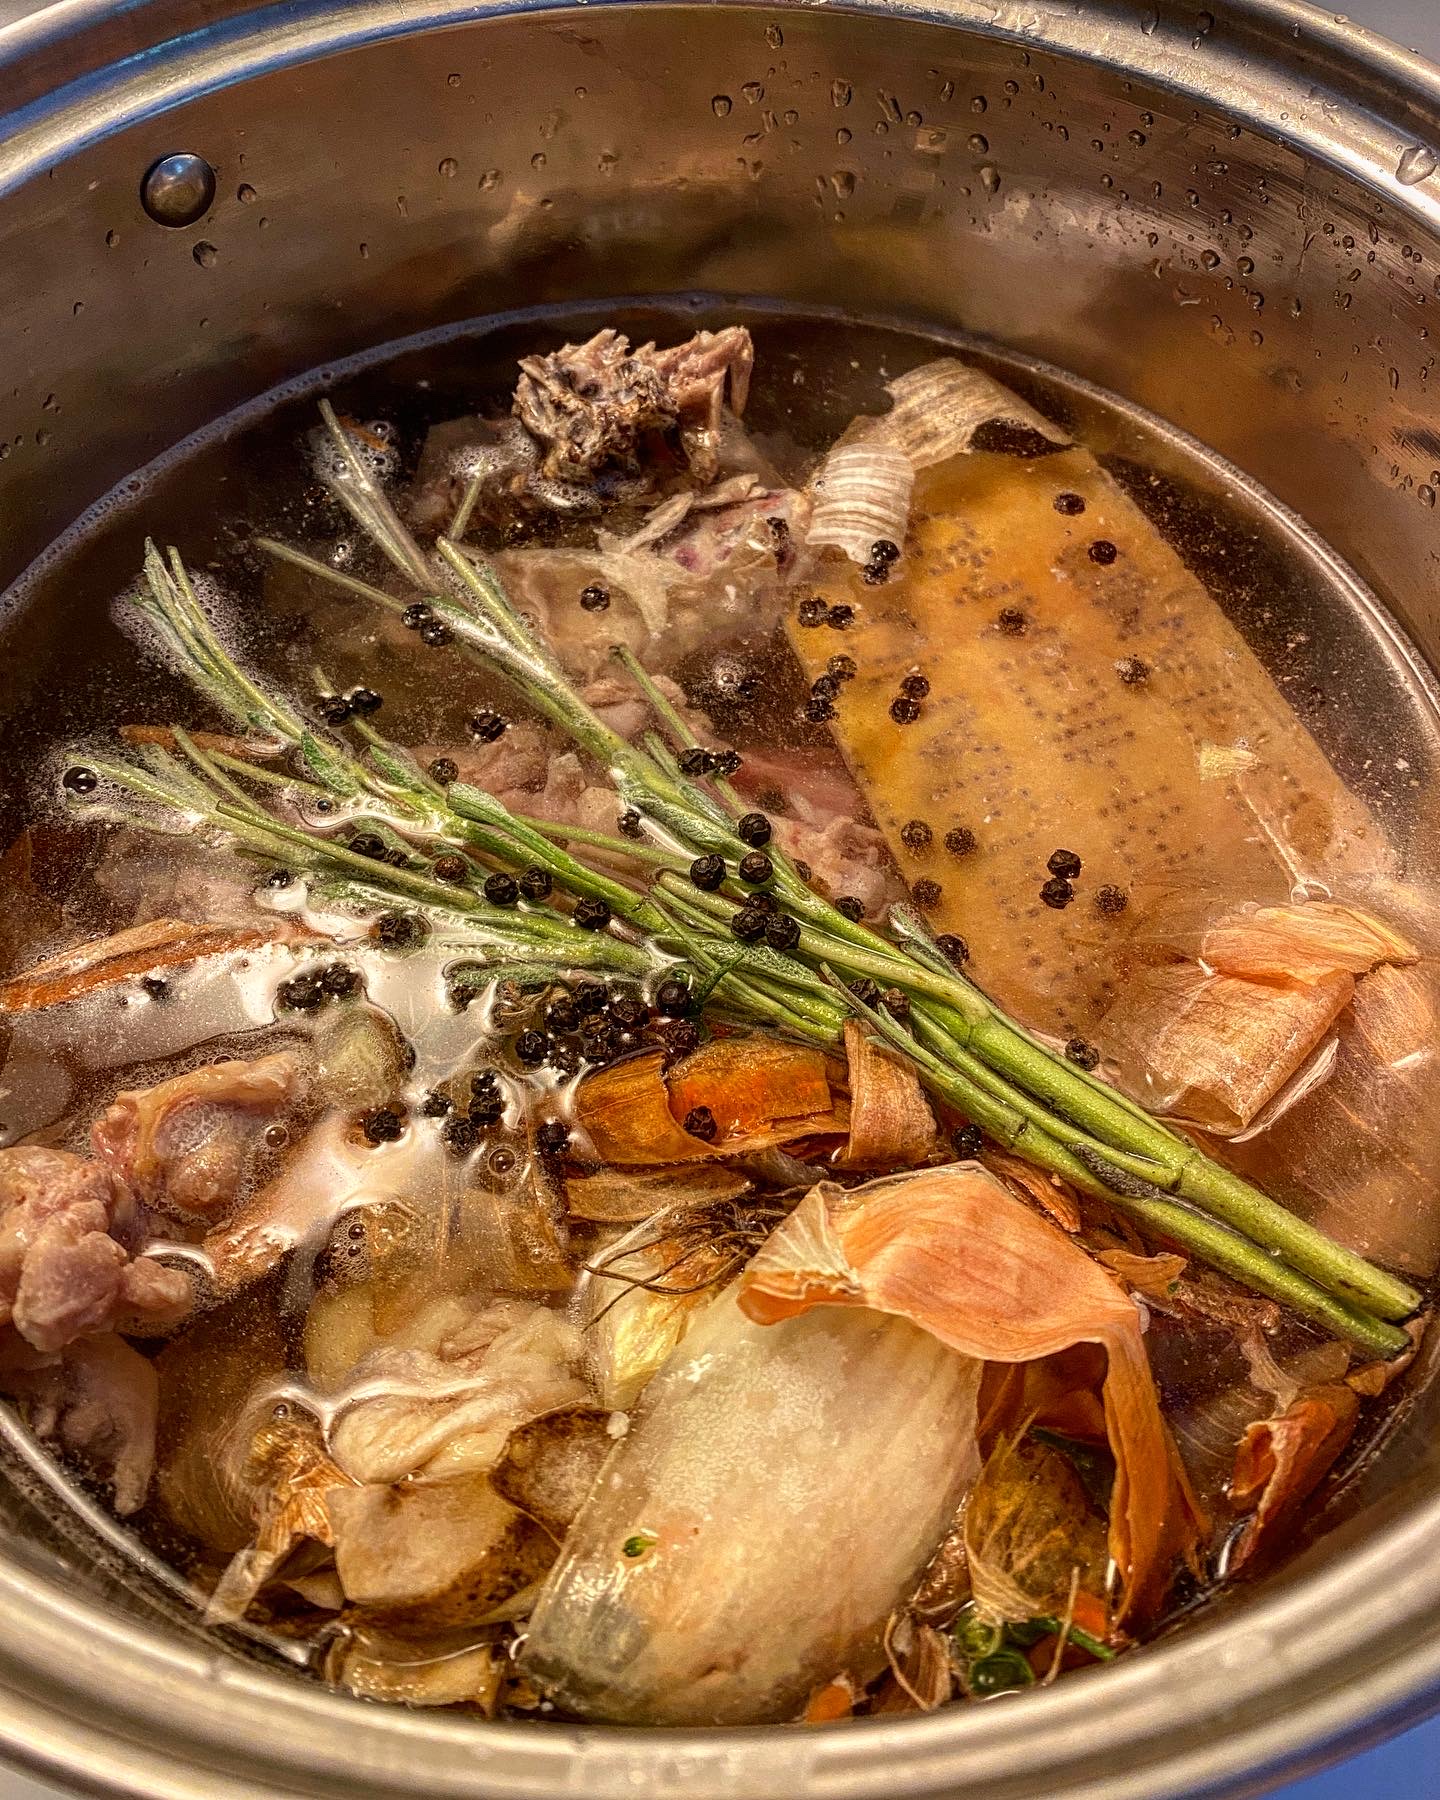 A pot filled with water and lots of vegetable scraps, herbs and chicken bones for making stock.